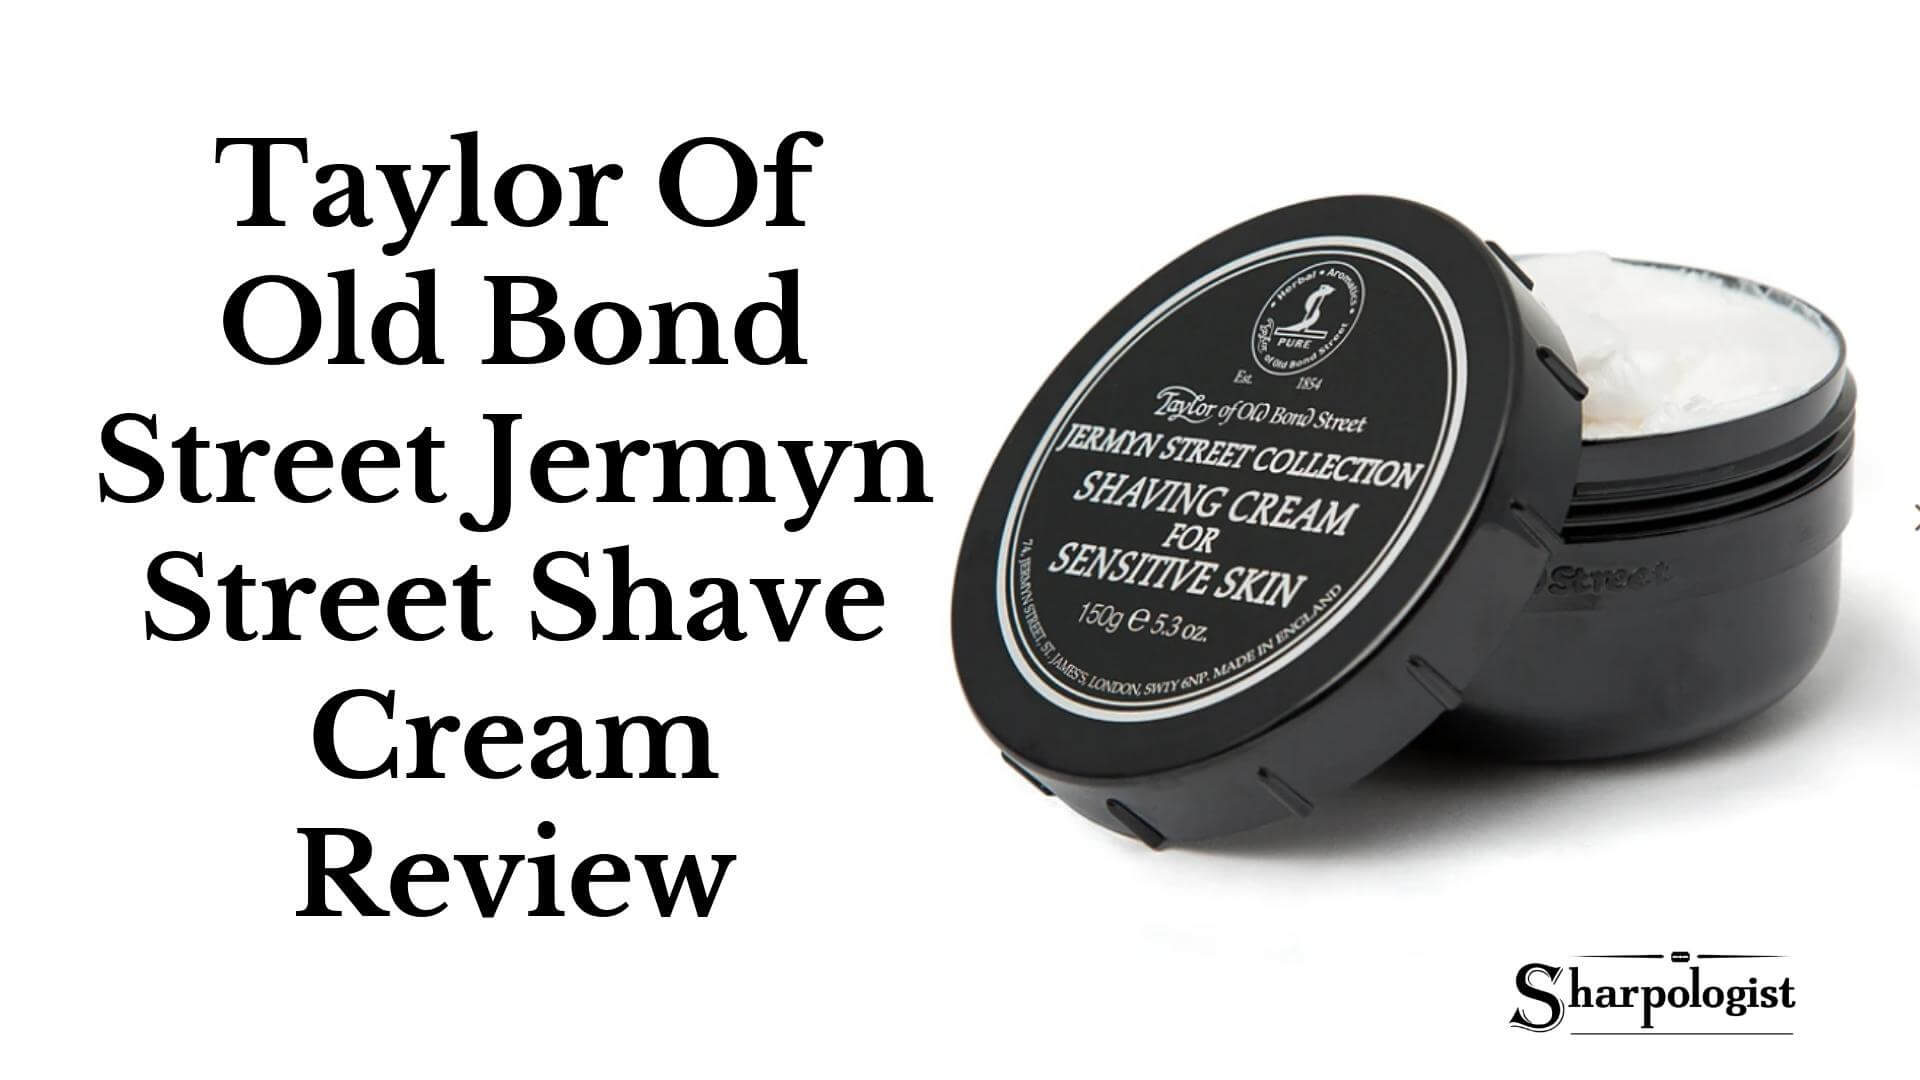 Old Street Bond Taylor Shave Street Review Cream Of Jermyn